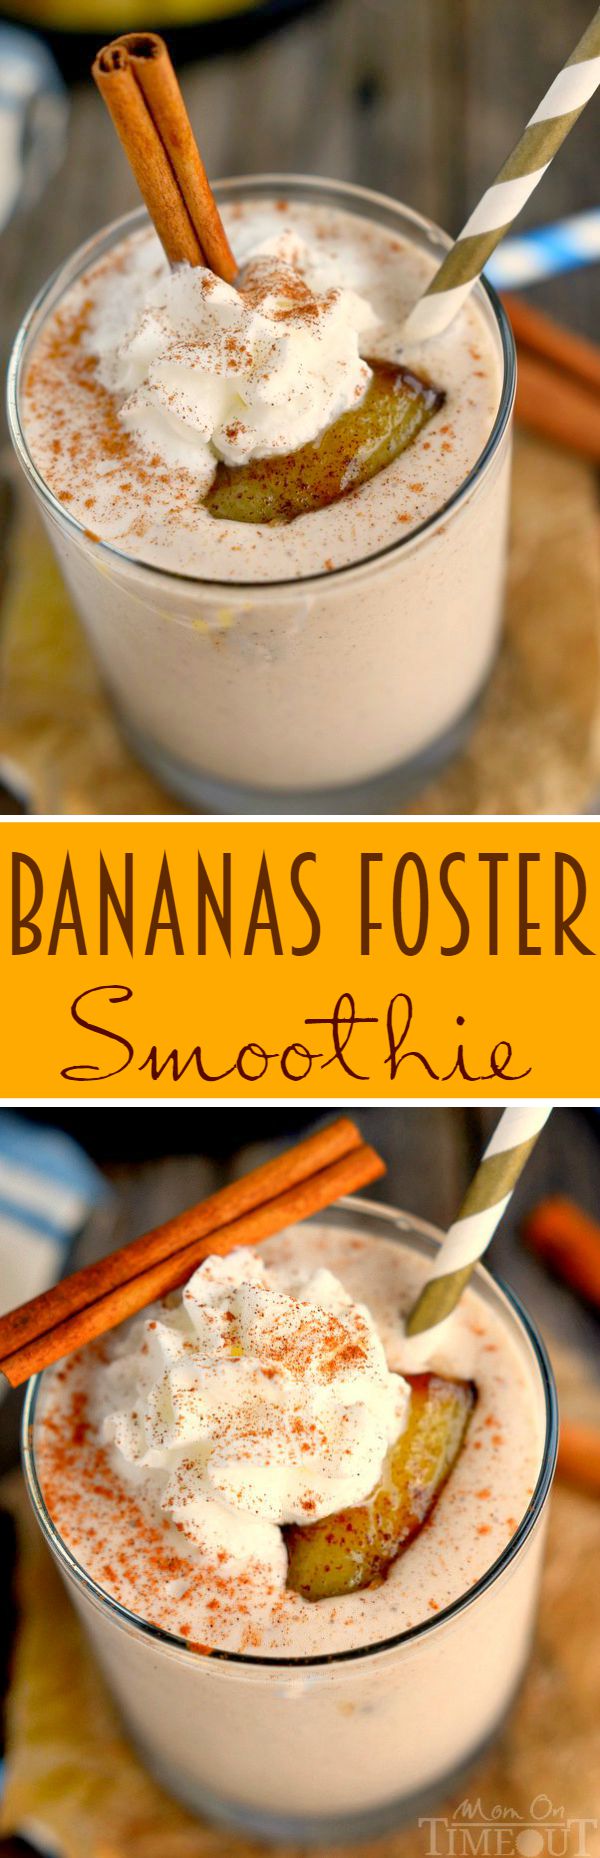 https://www.momontimeout.com/wp-content/uploads/2015/08/bananas-foster-smoothie-collage-1.jpg